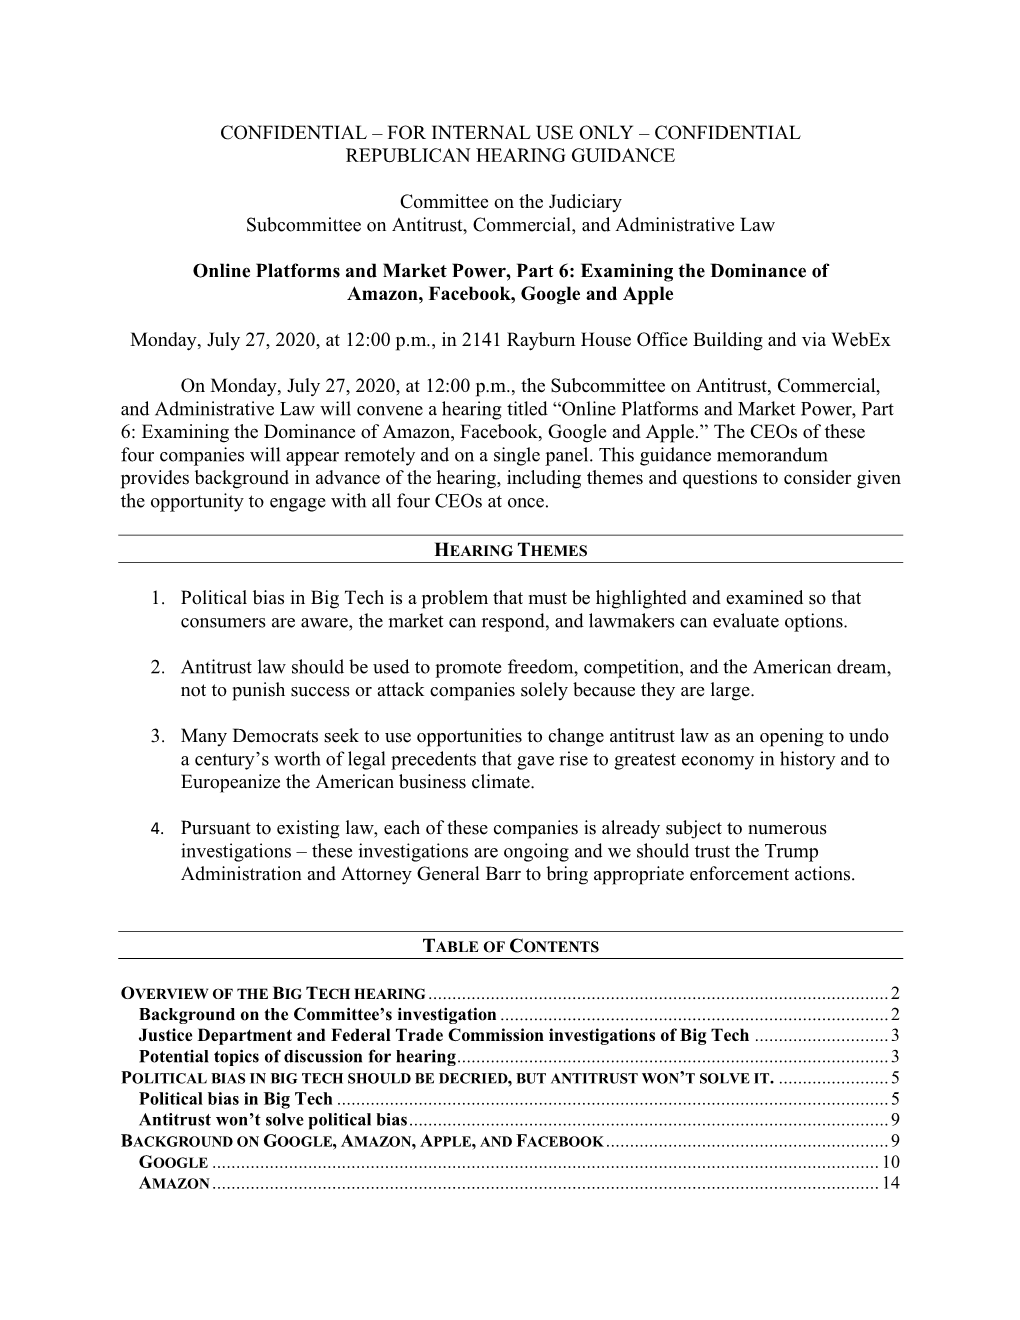 Confidential – for Internal Use Only – Confidential Republican Hearing Guidance